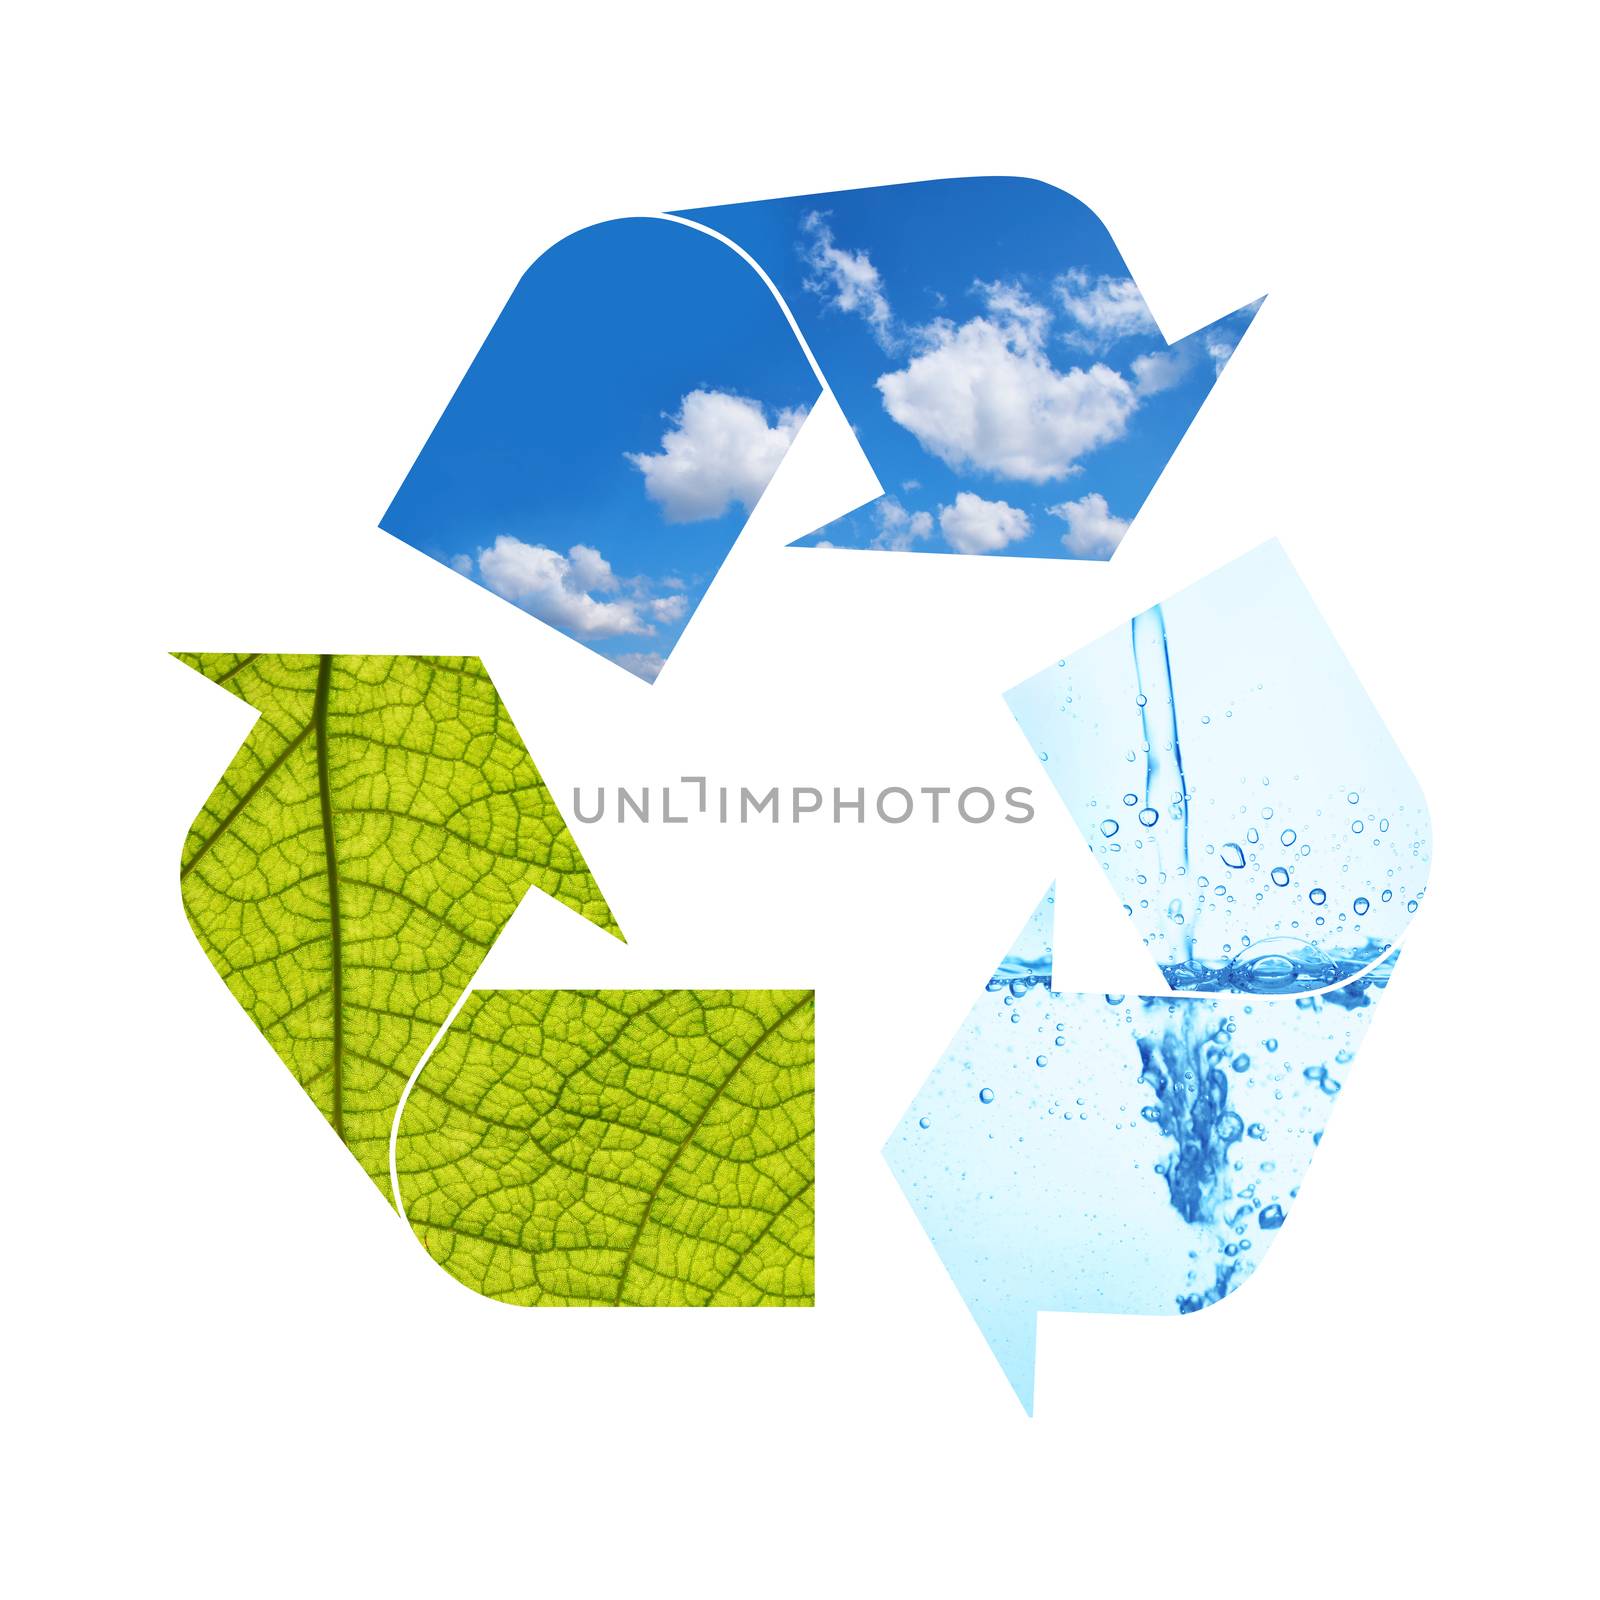 Illustration recycling symbol of nature elements, green foliage, blue sky and water isolated on white background